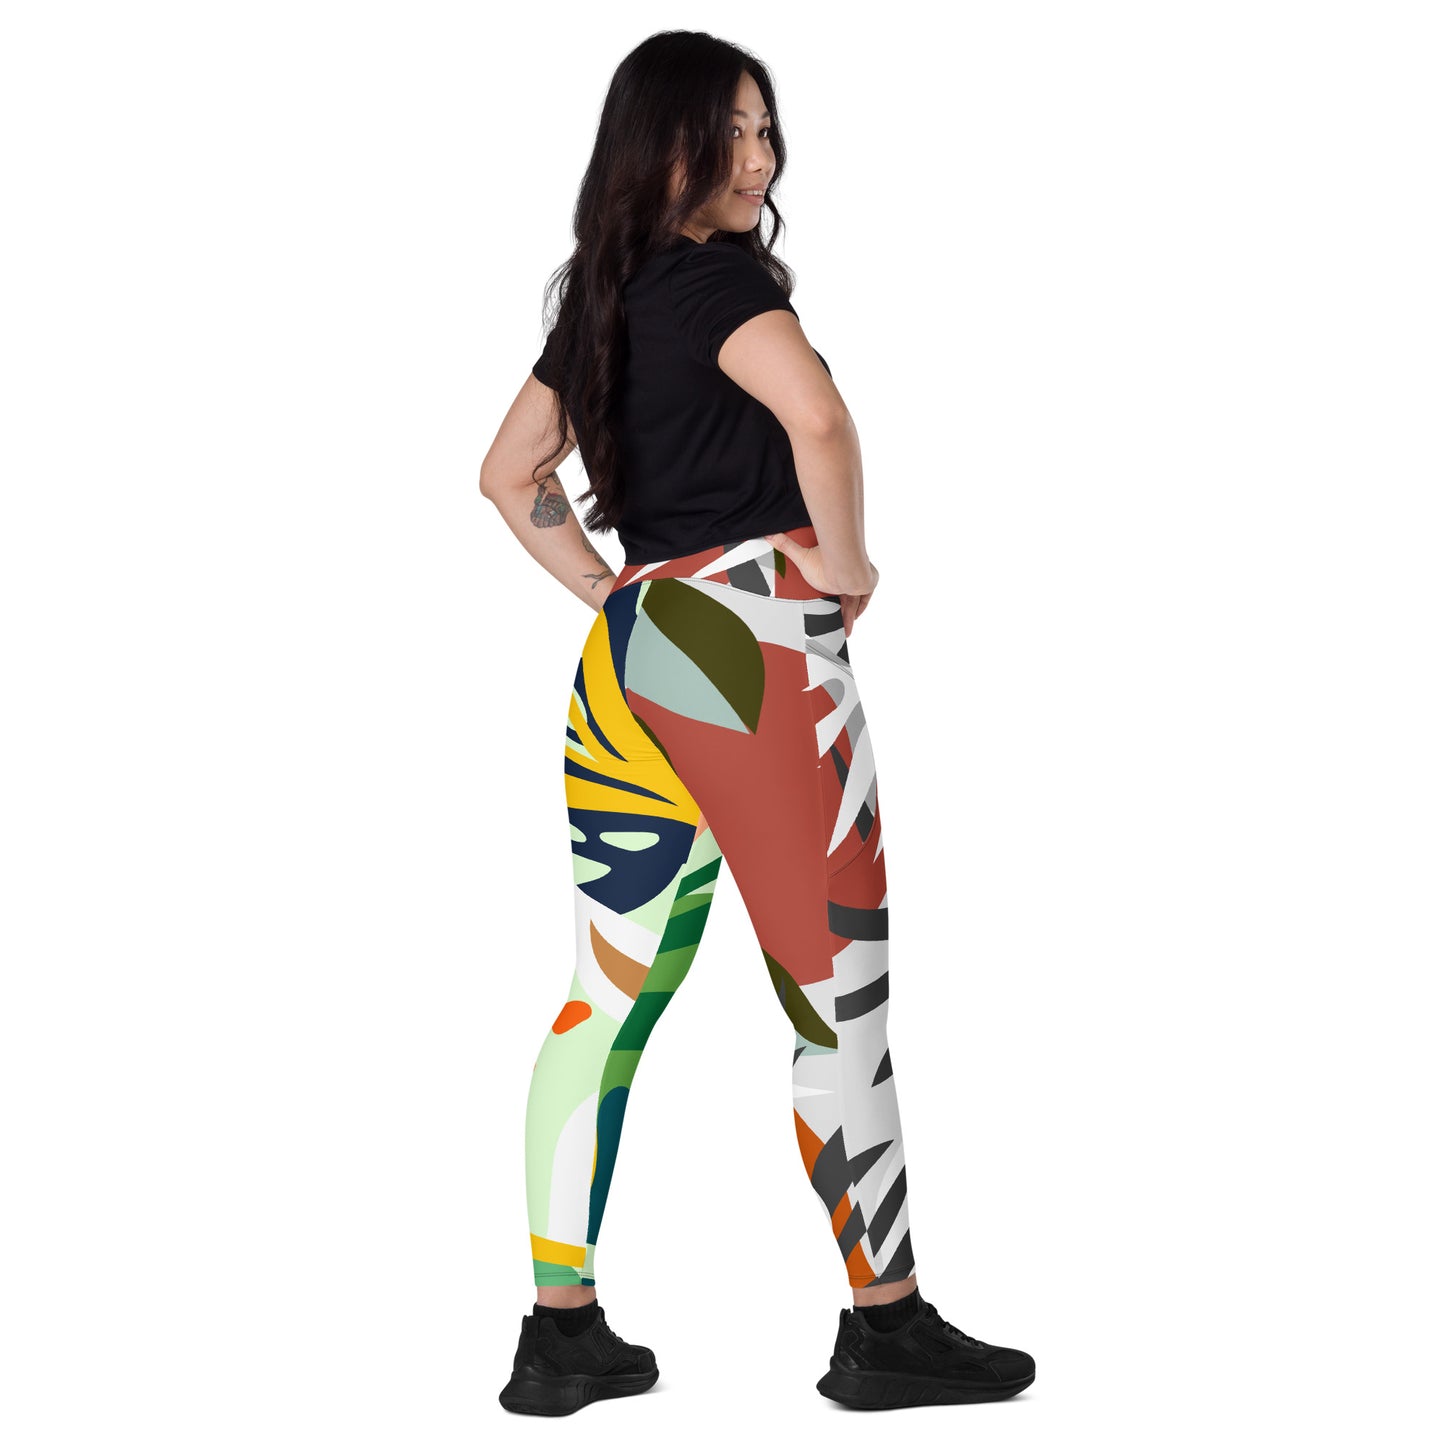 Floral High Waist Crossover leggings with pockets